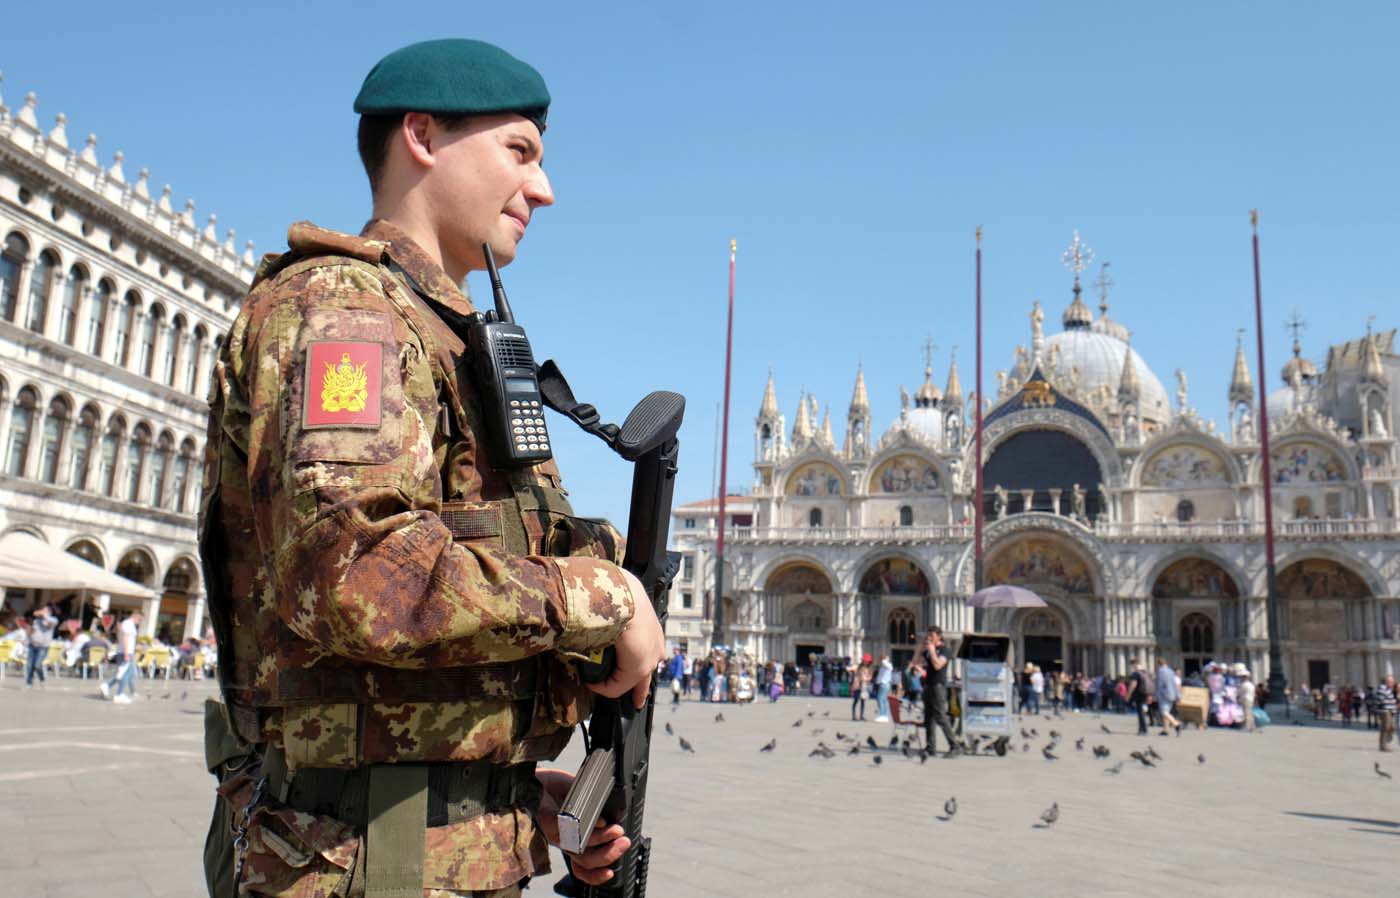 A soldier patrols Saint Mark's Square in Venice, Italy March 30, 2017. REUTERS/Manuel Silvestri